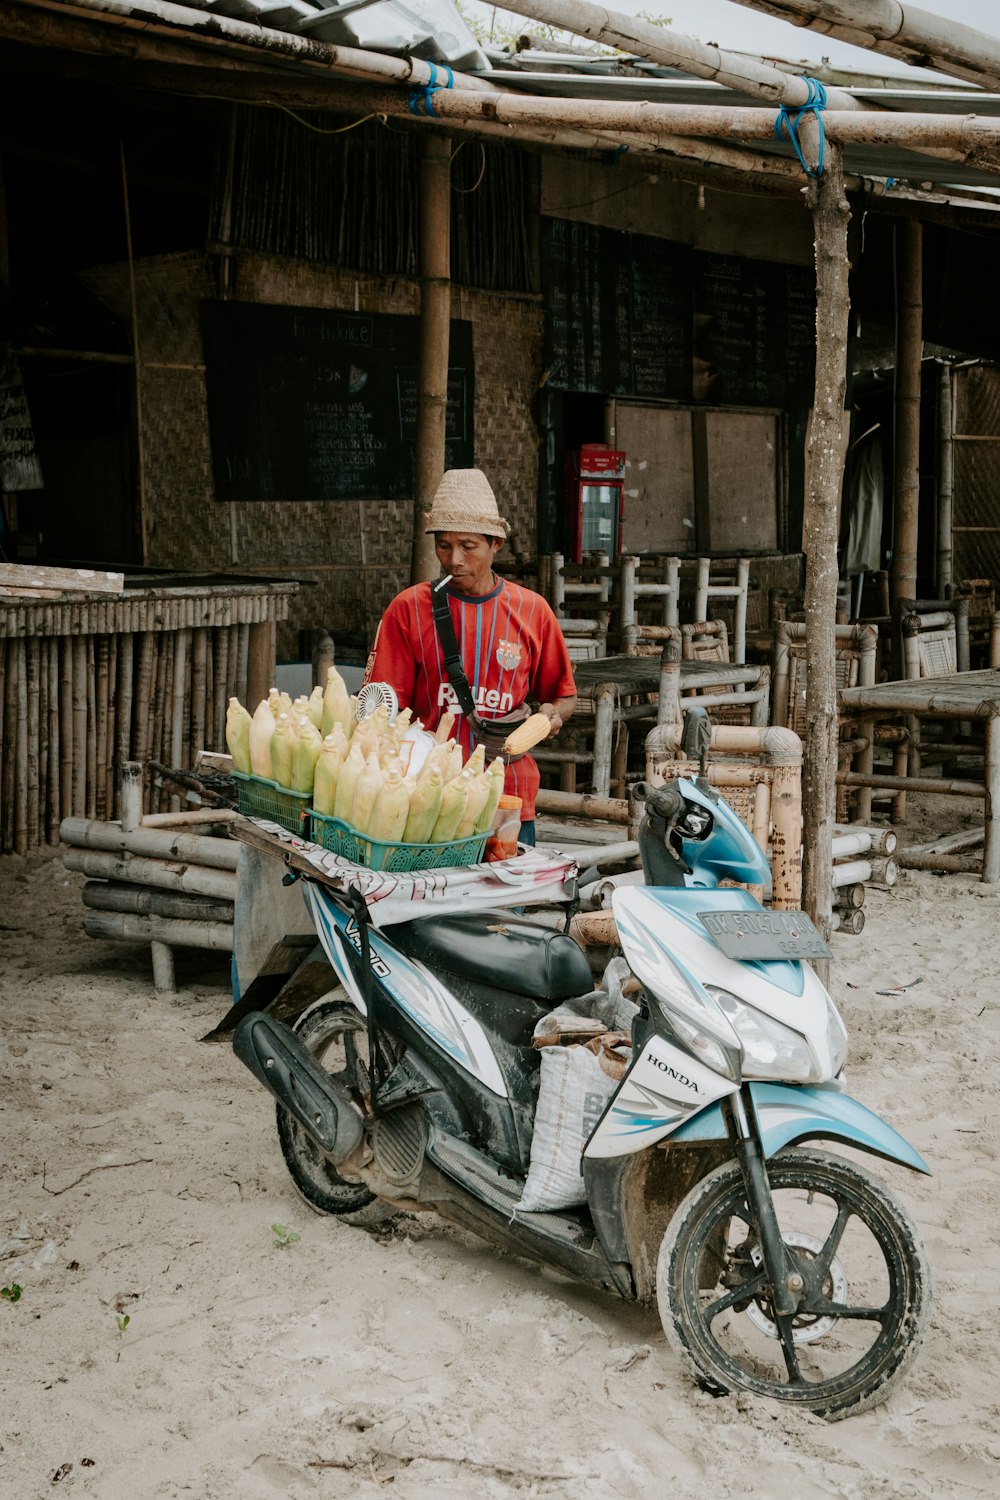 a person selling vegetables on a motorcycle